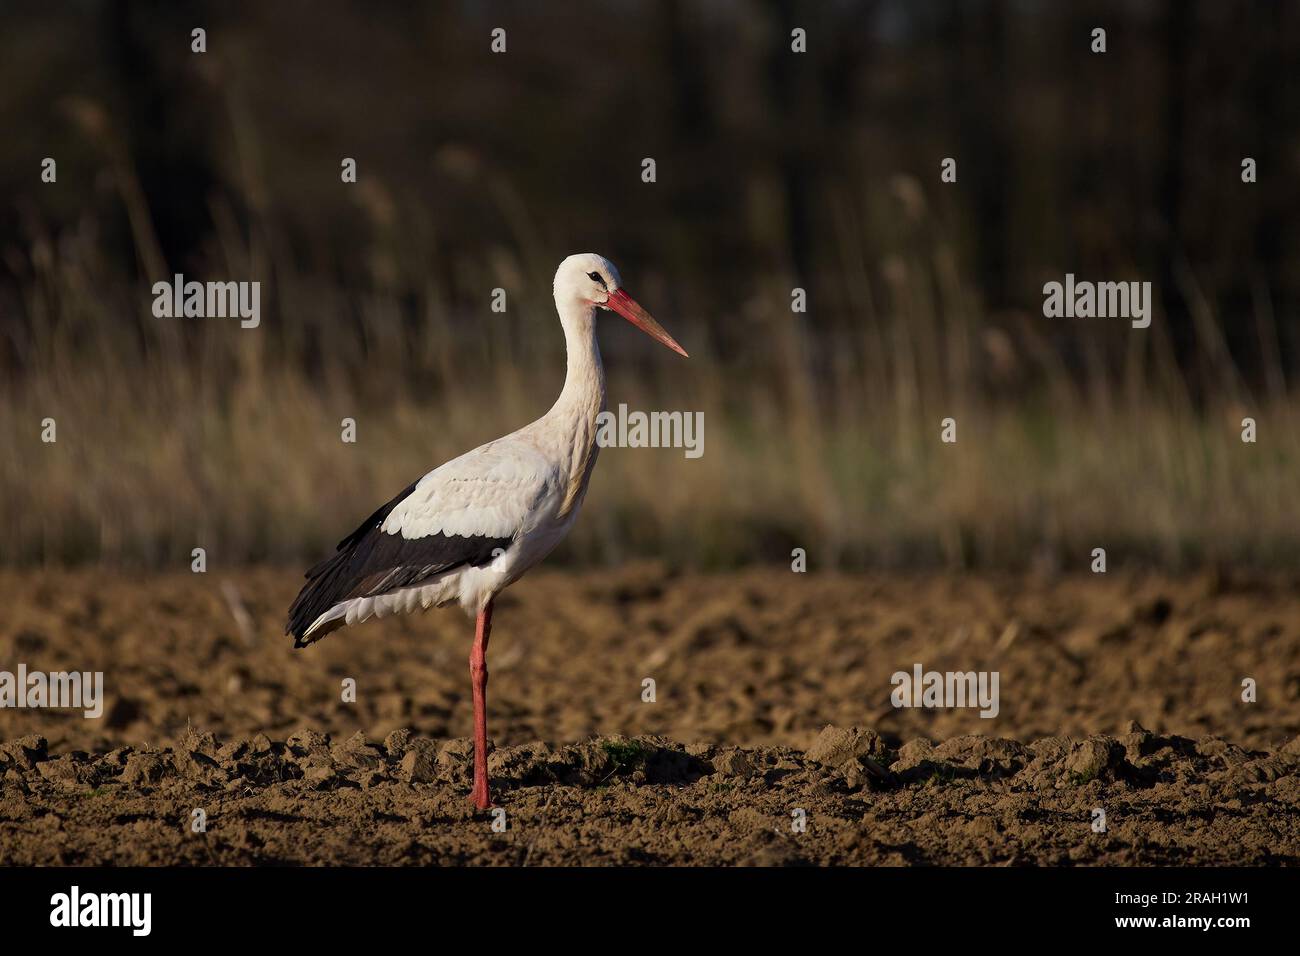 White stork (Ciconia ciconia) in its natural environment Stock Photo